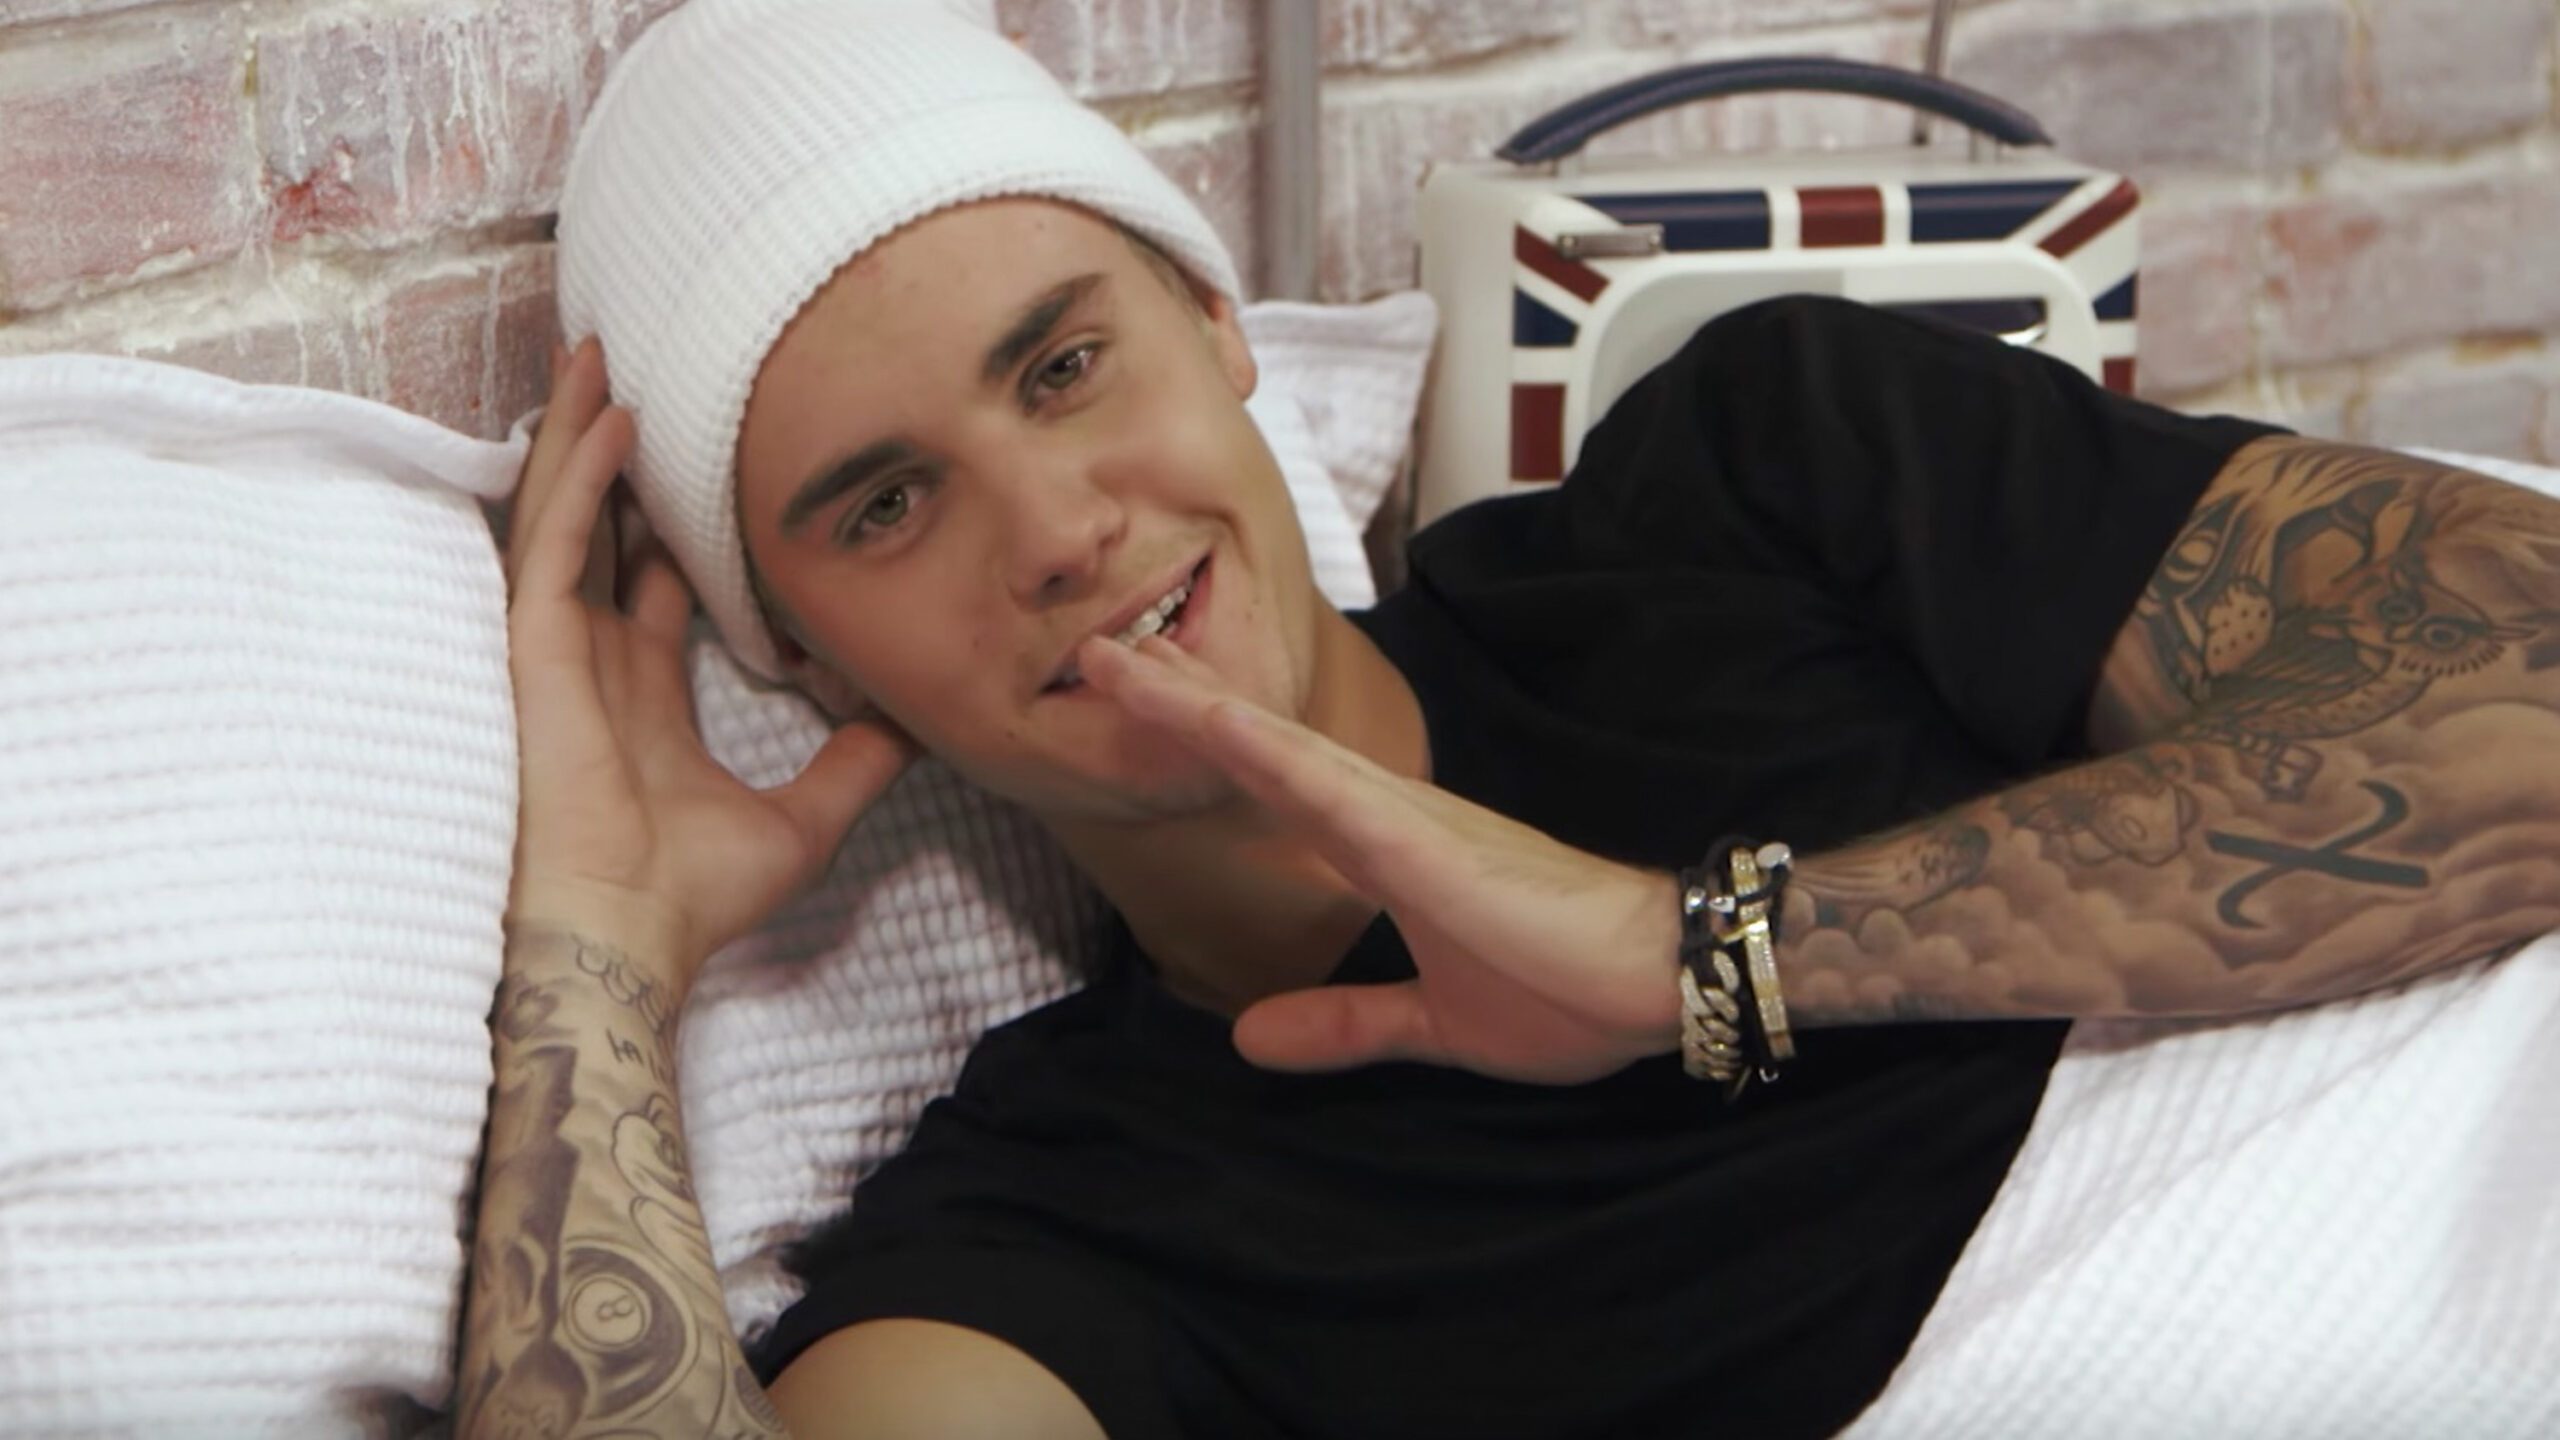 WATCH: Justin Bieber, Nick Jonas, more spoof Kanye West’s ‘Famous’ video